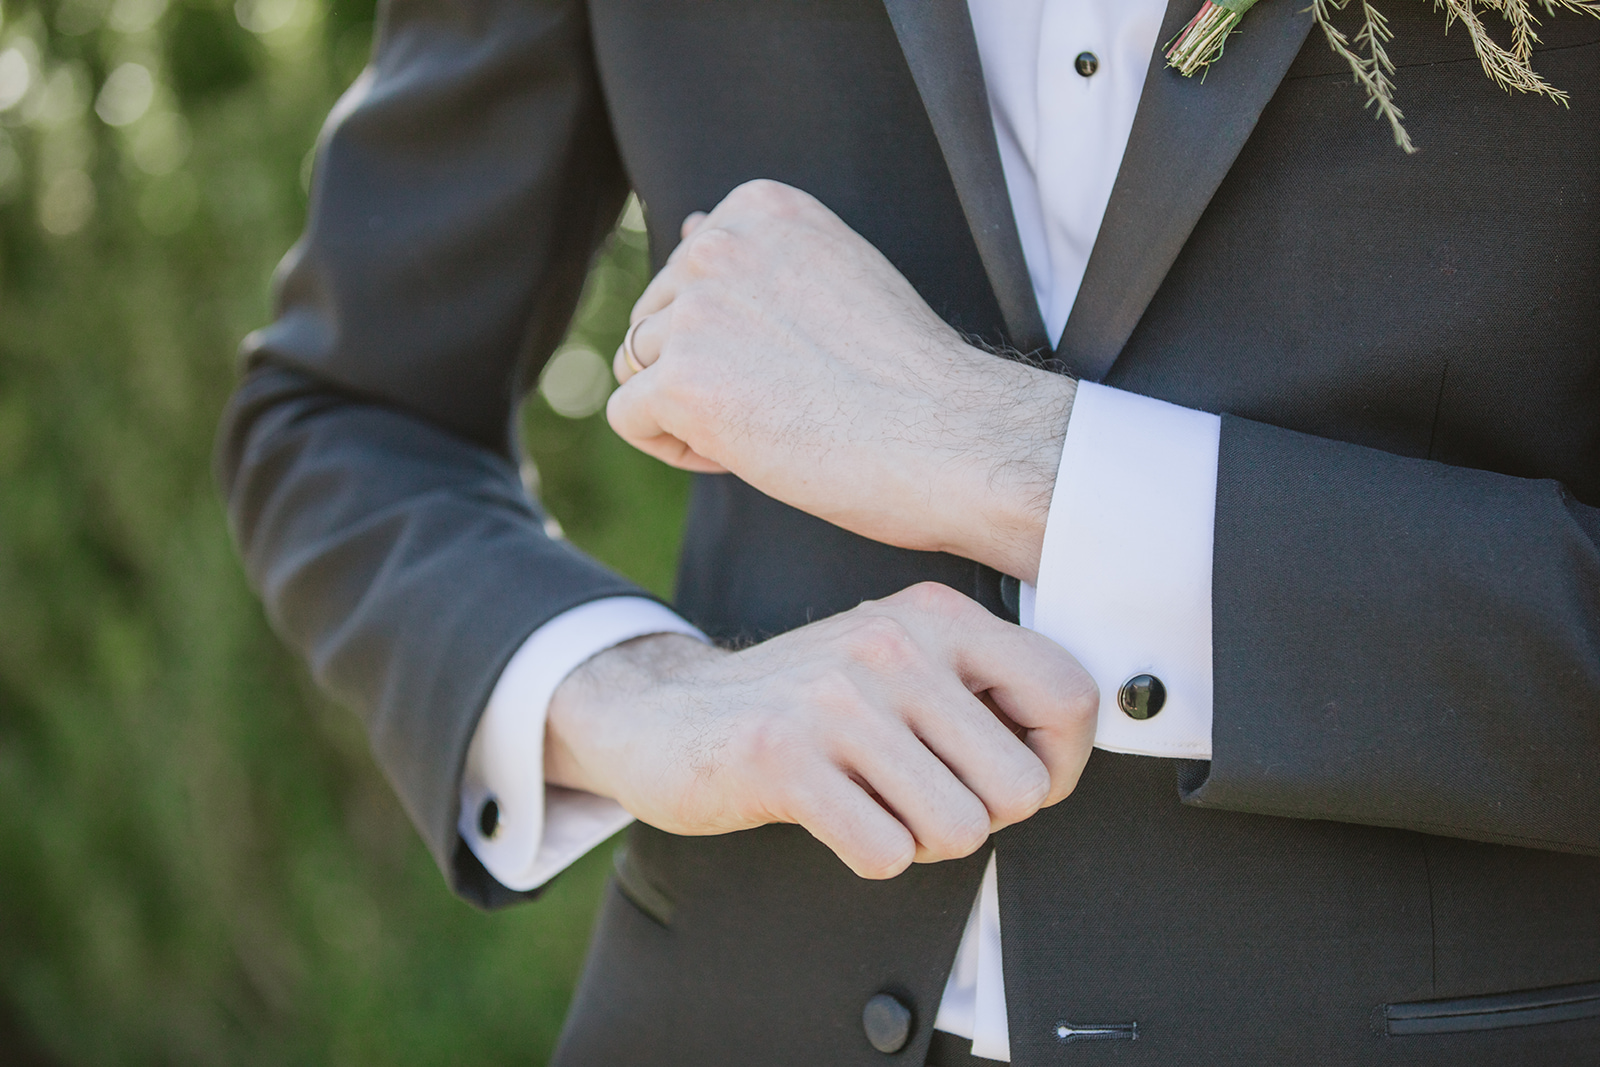  Classic Black Tux for the groom from Formally Modern Tuxedo 